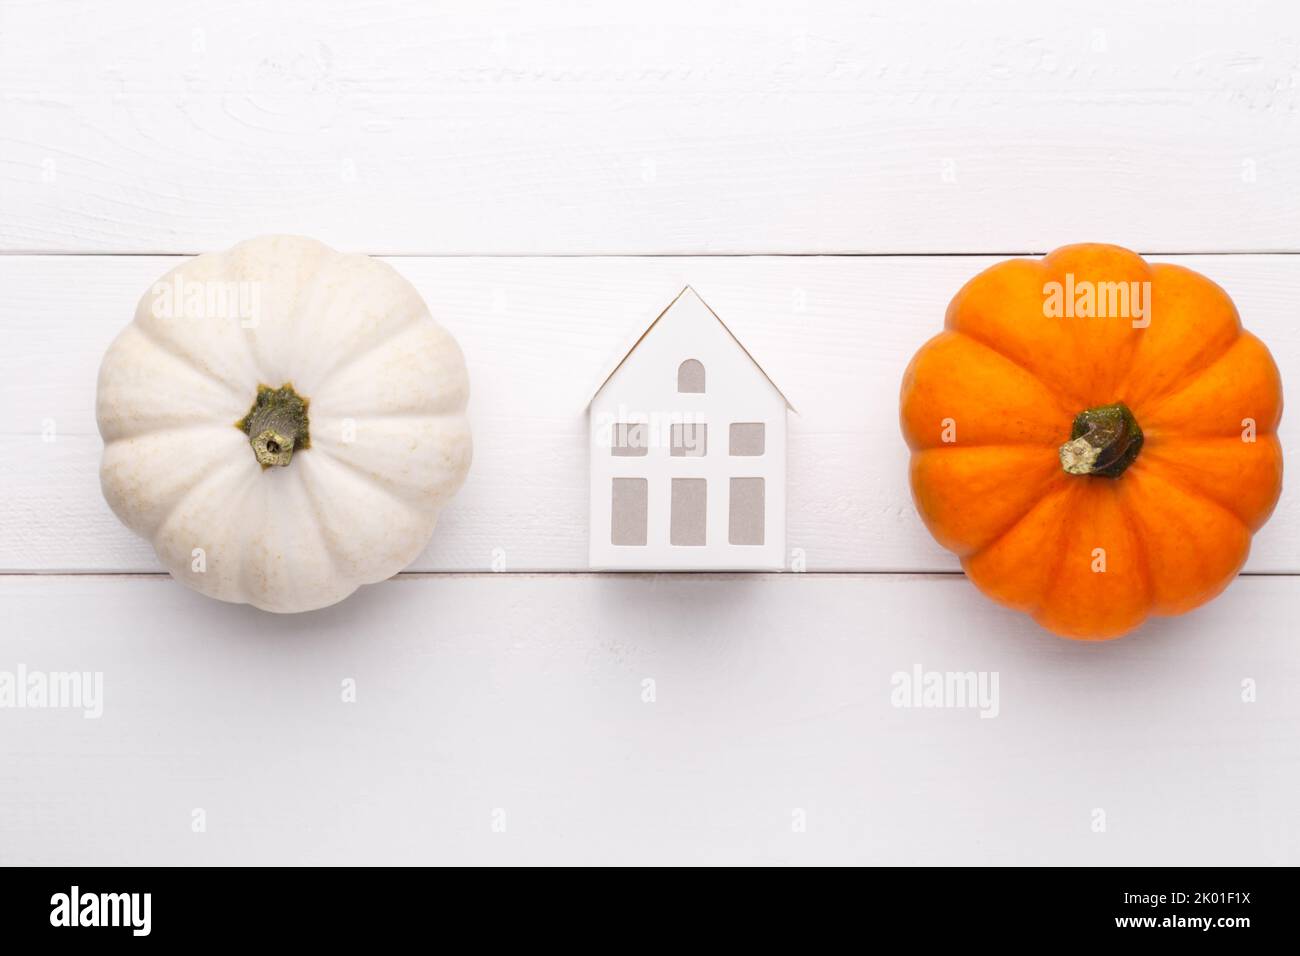 White and orange decorative pumpkins and white littel house toy on the white wooden background, flat lay with copy space Stock Photo